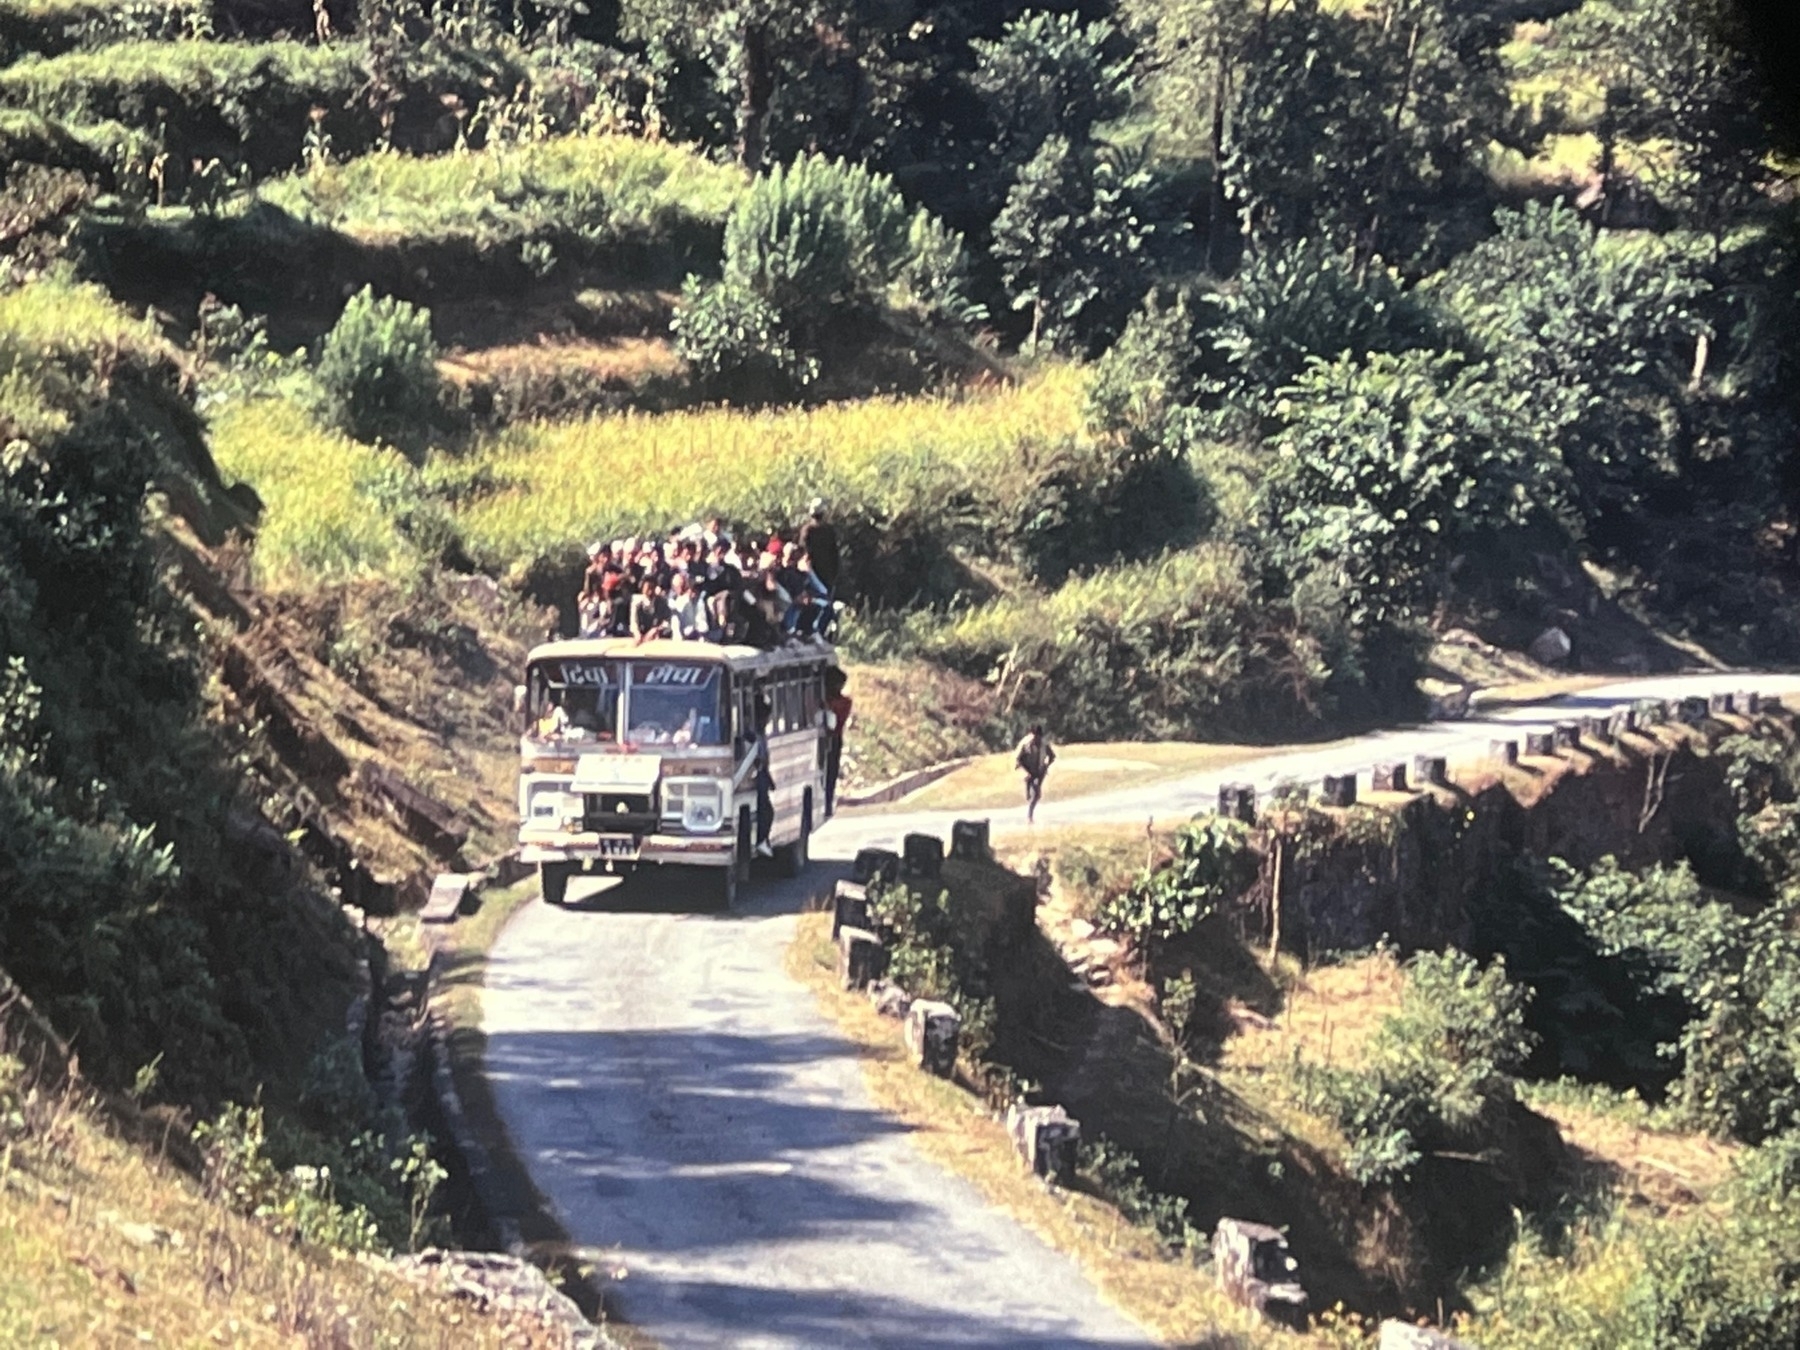 A bus, that is so full that people are sitting on top of the luggage on the roof, winds its way up a narrow road in a rural setting